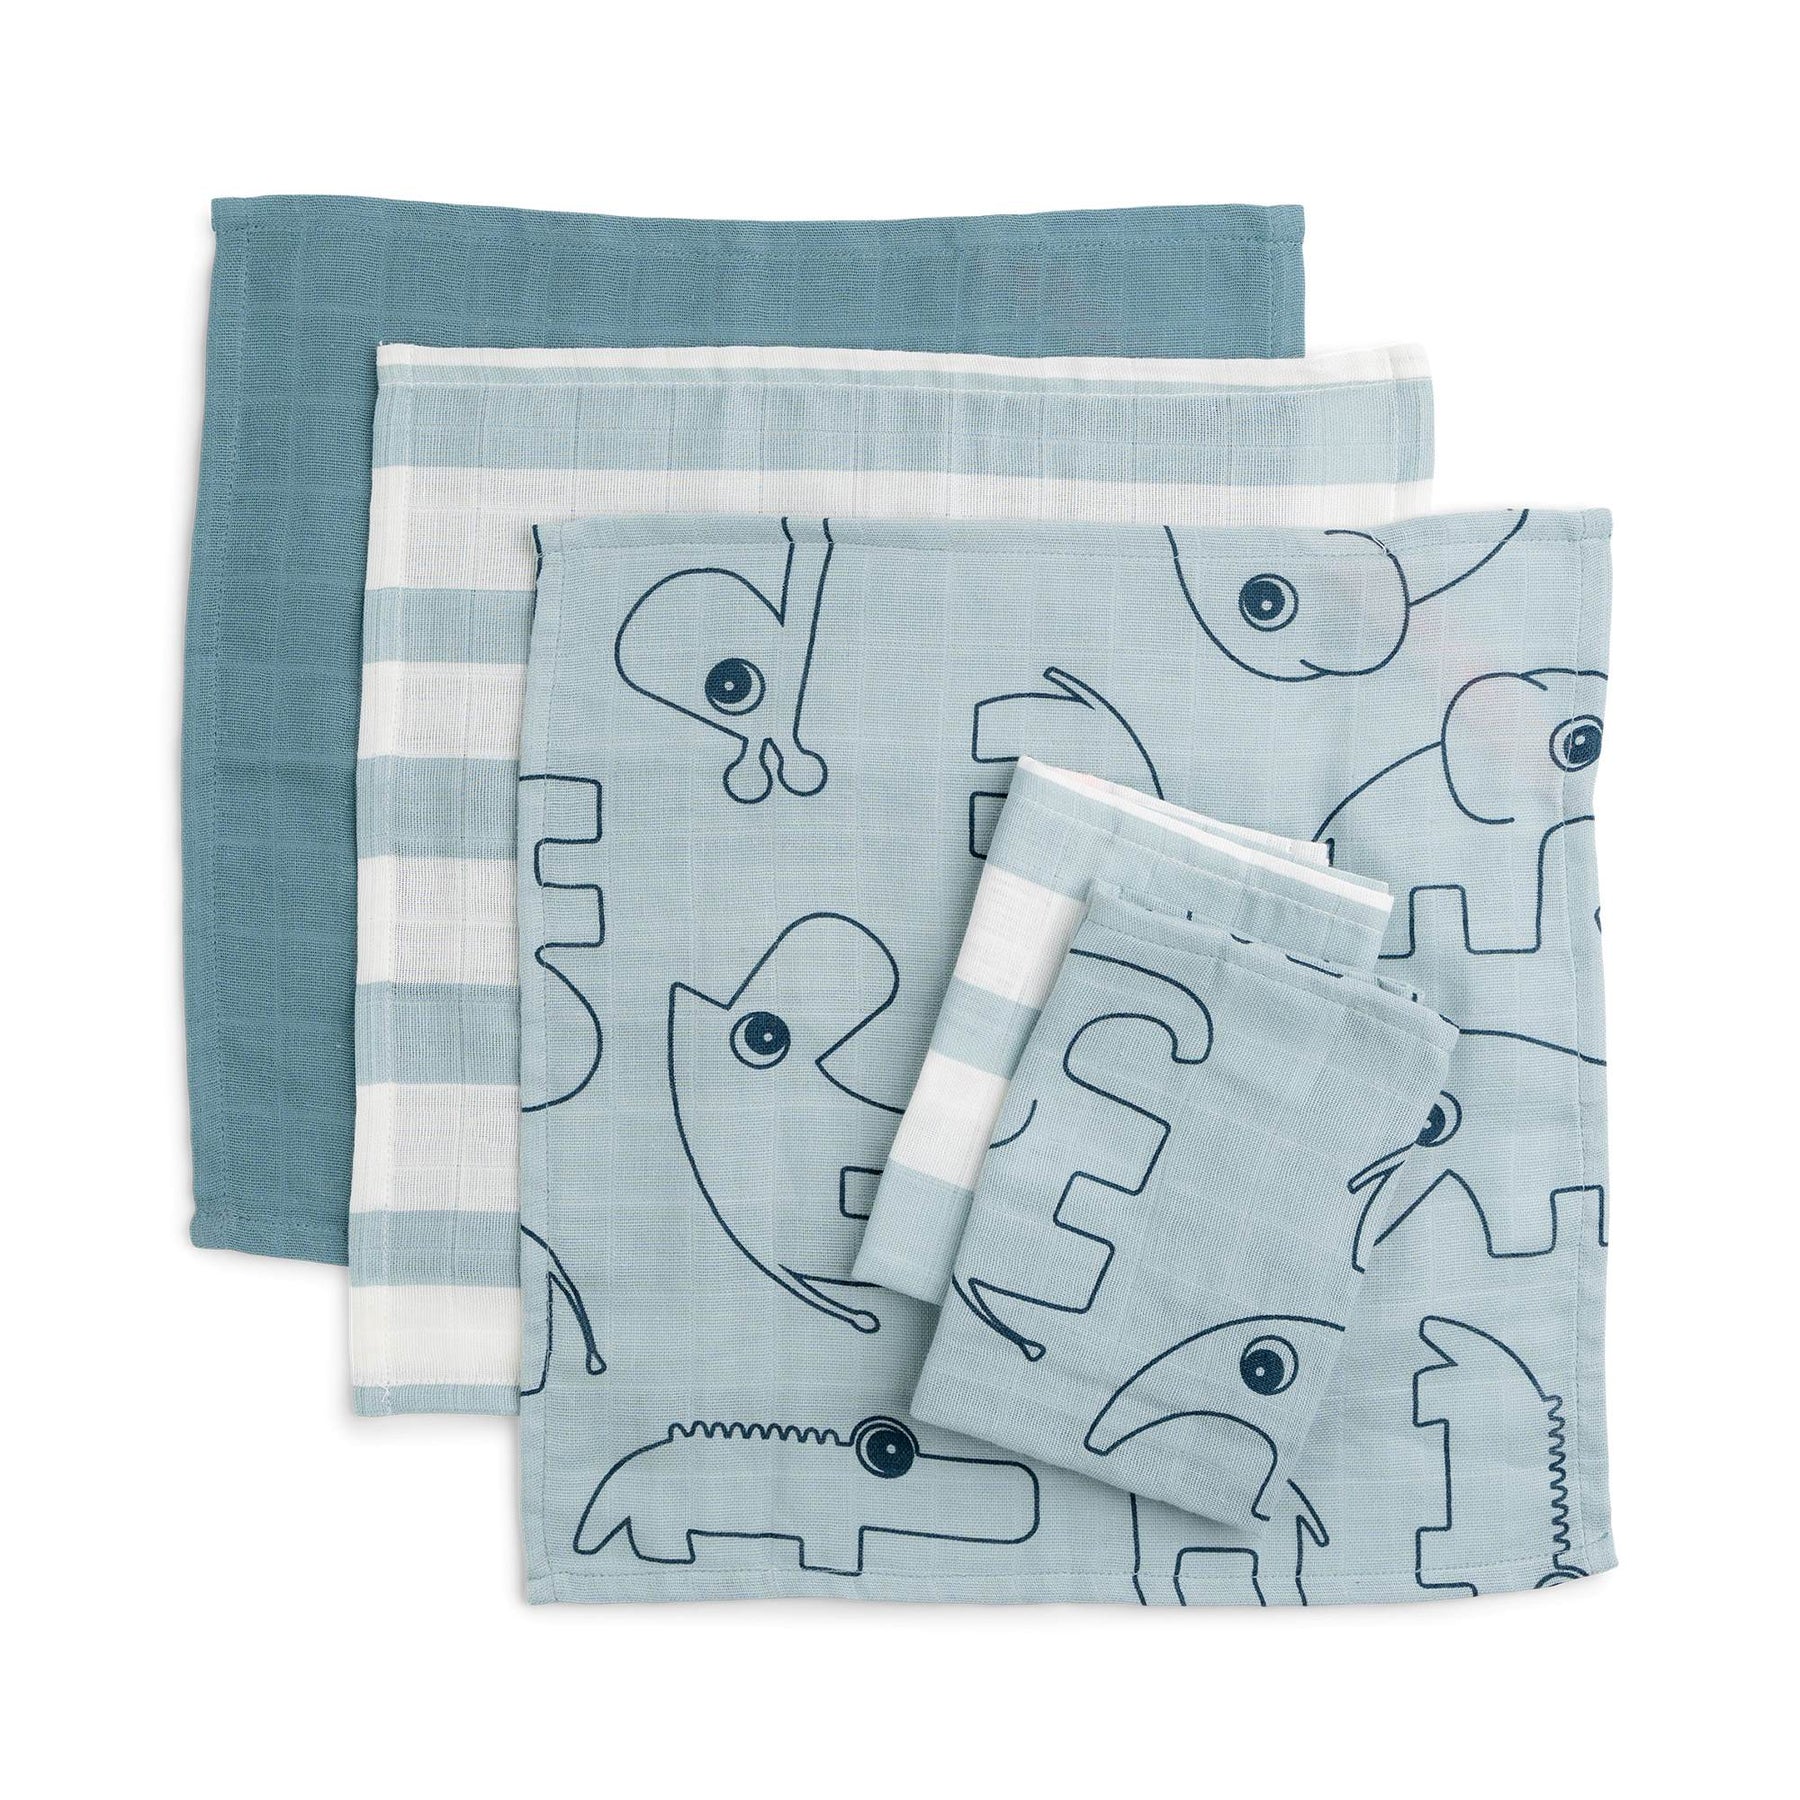 Cloth wipes 5-pack - Deer friends - Blue - Front